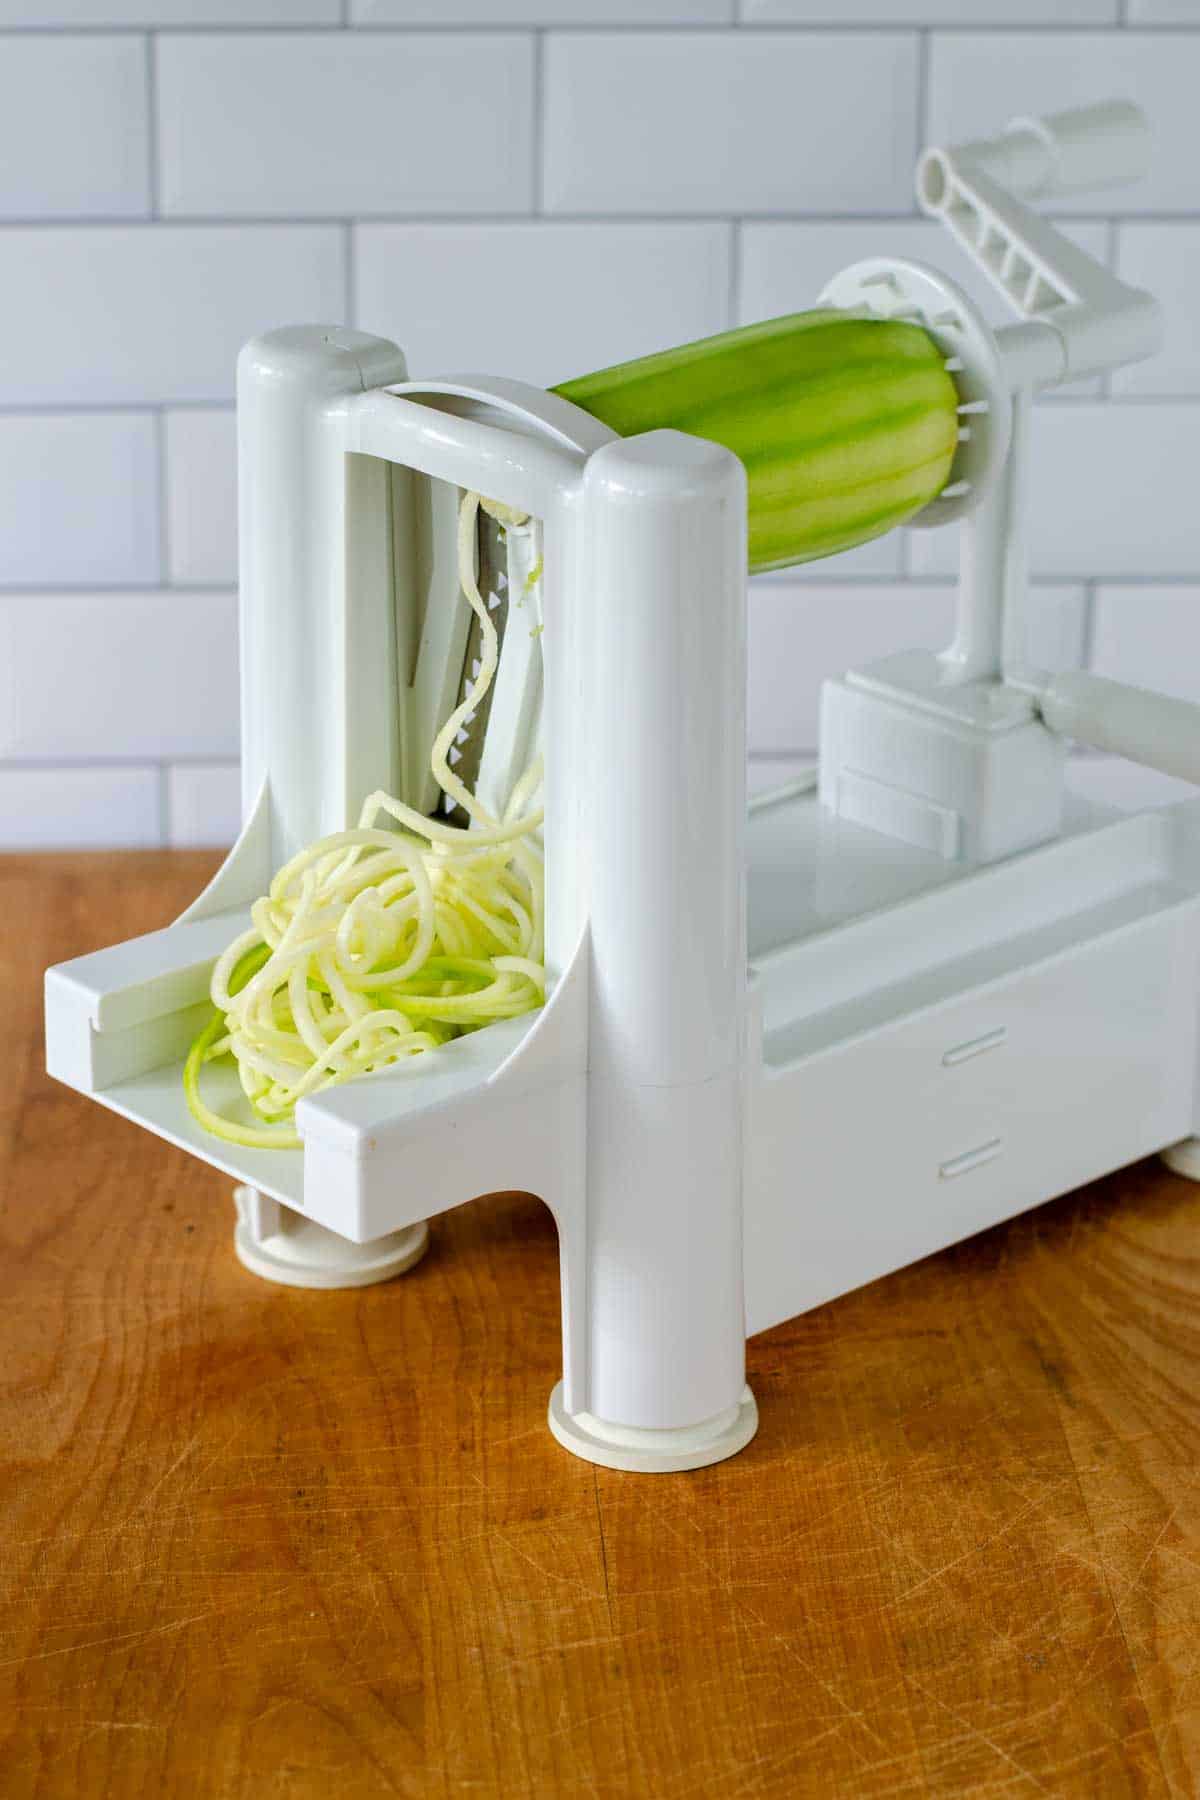 Zucchini noodles made with spiral blades